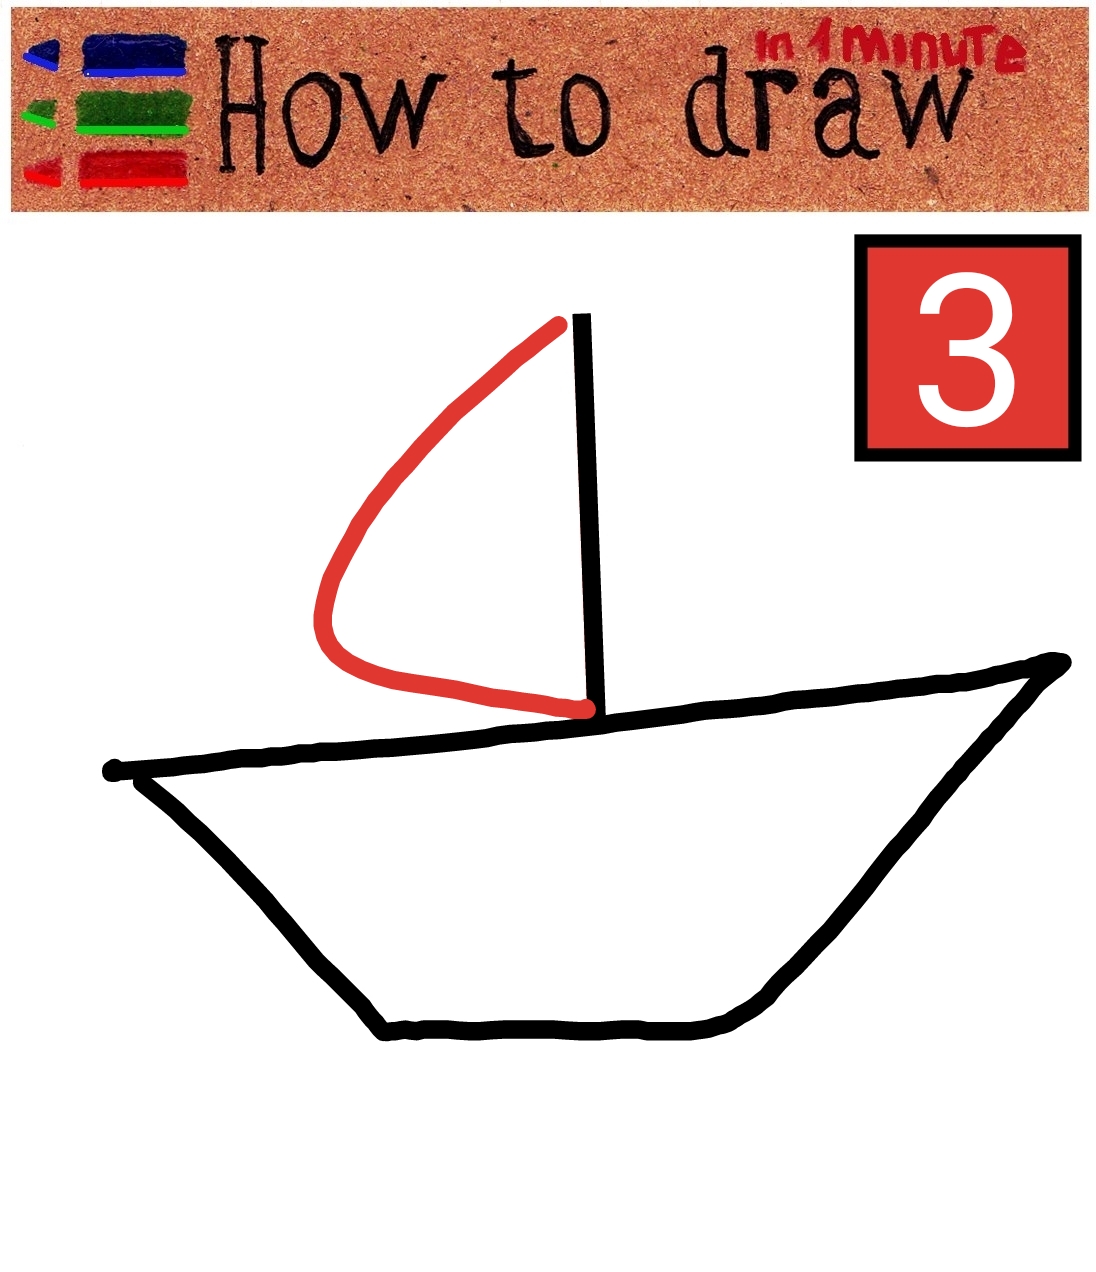 How to paint a boat in 5 steps